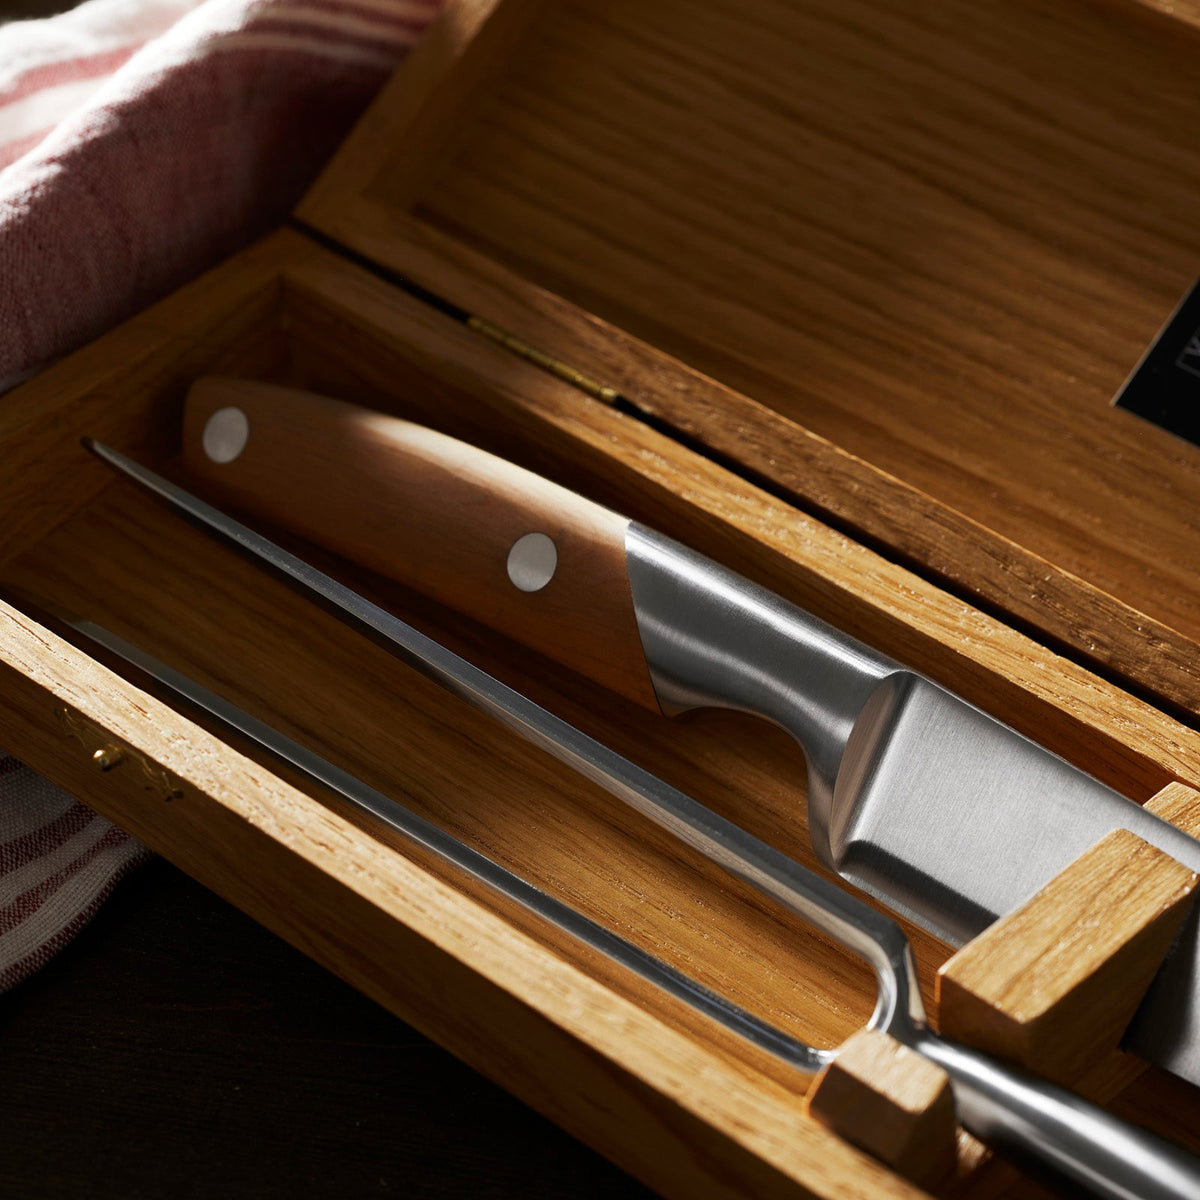 A Goyon-Chazeau Juniper Wood Carving Set with Le Thiers blades and Goyon-Chazeau craftsmanship, neatly stored in a wooden box.